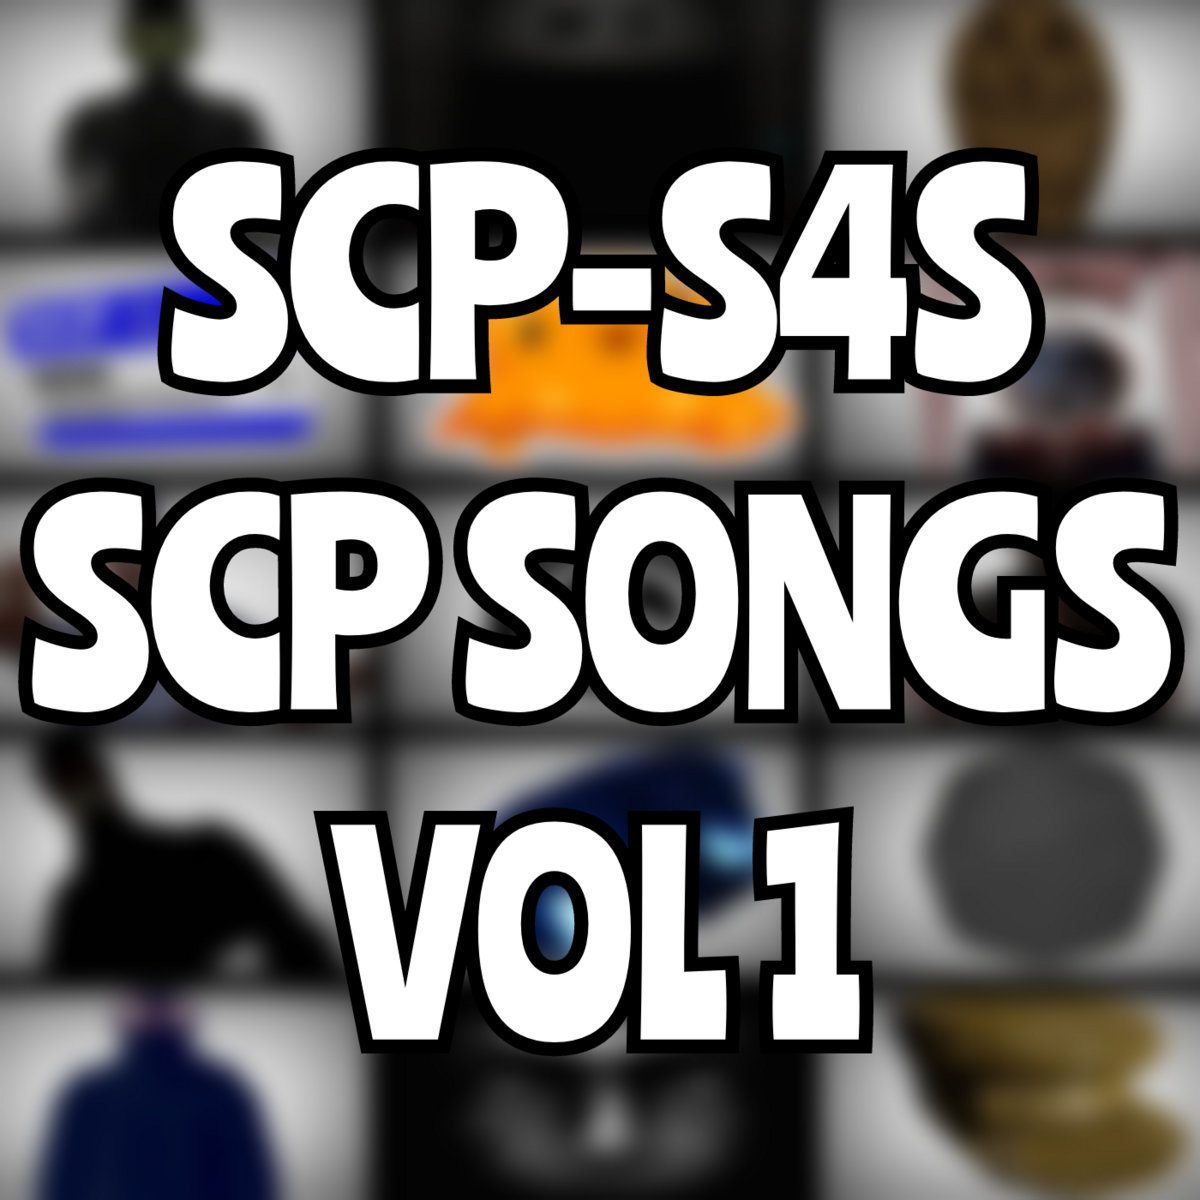 SCP-008, SCP Documents